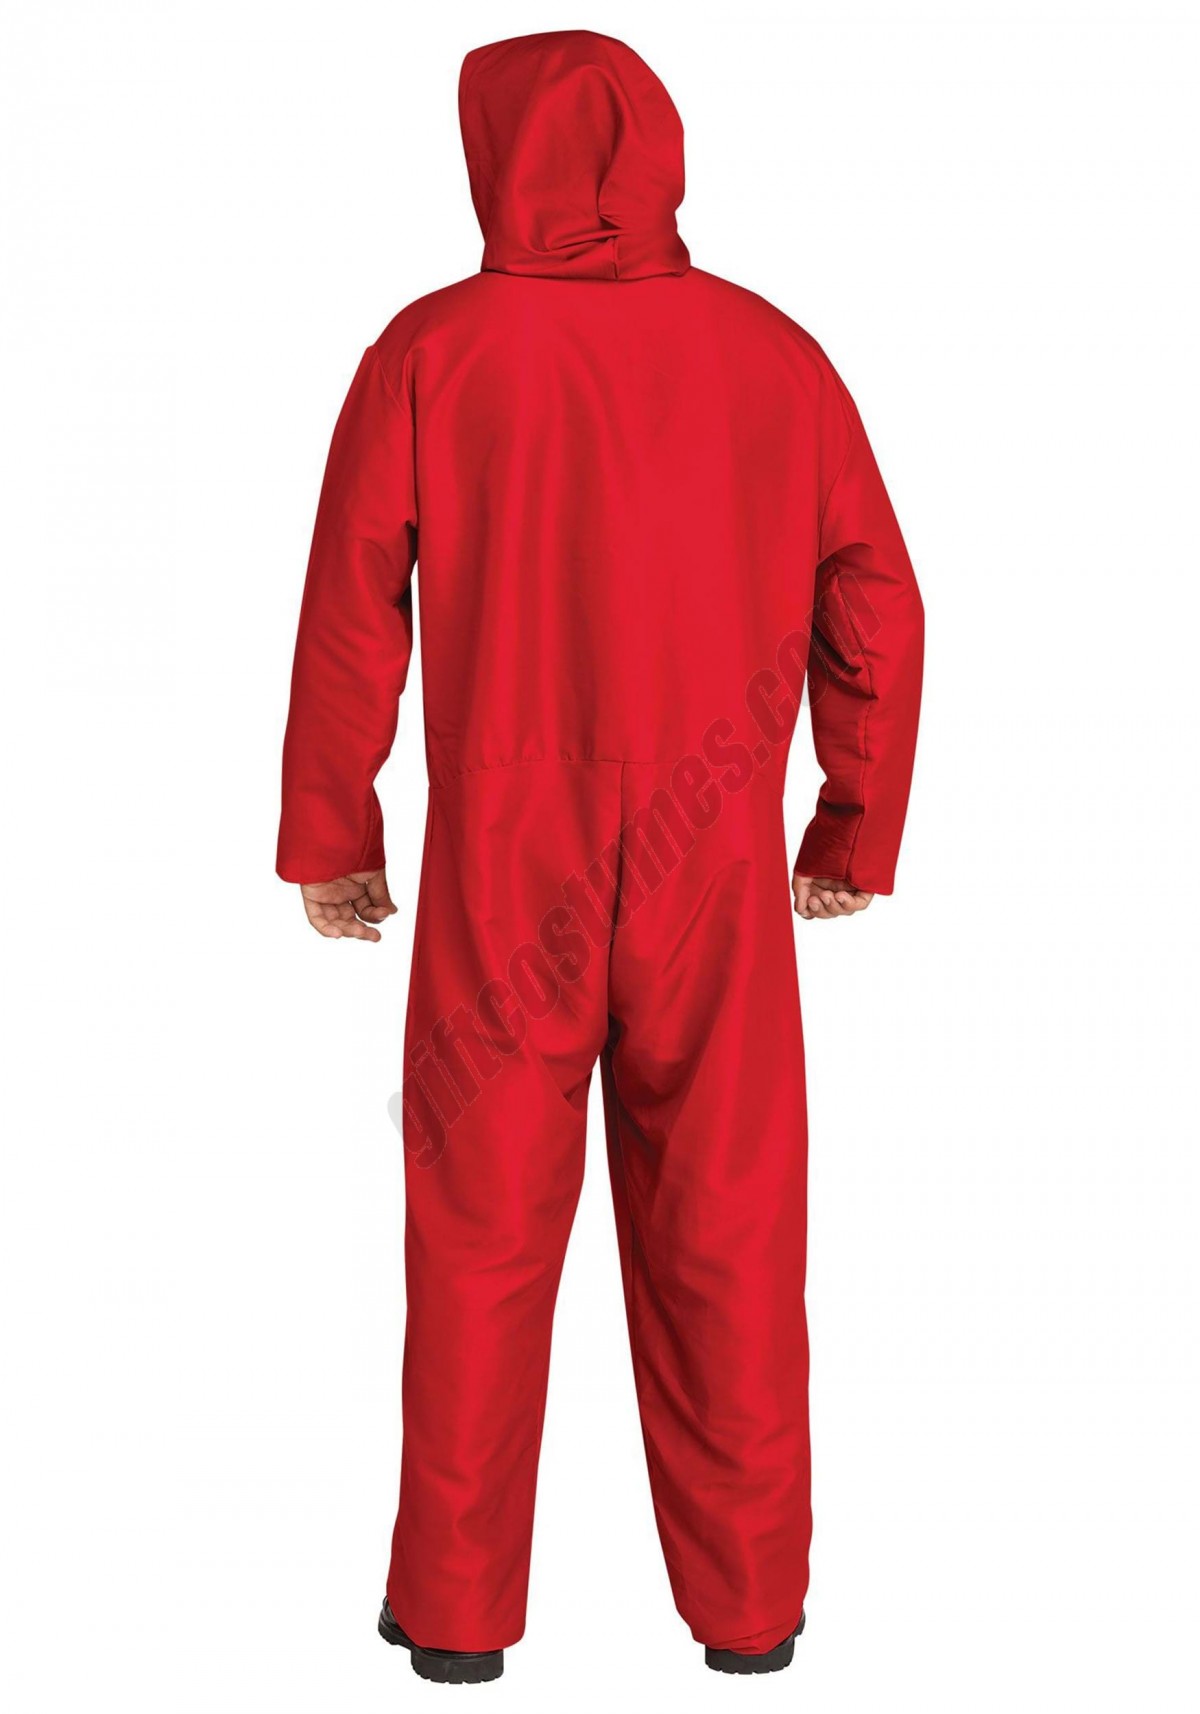 Red Bank Robber Costume for Adults - Women's - -1